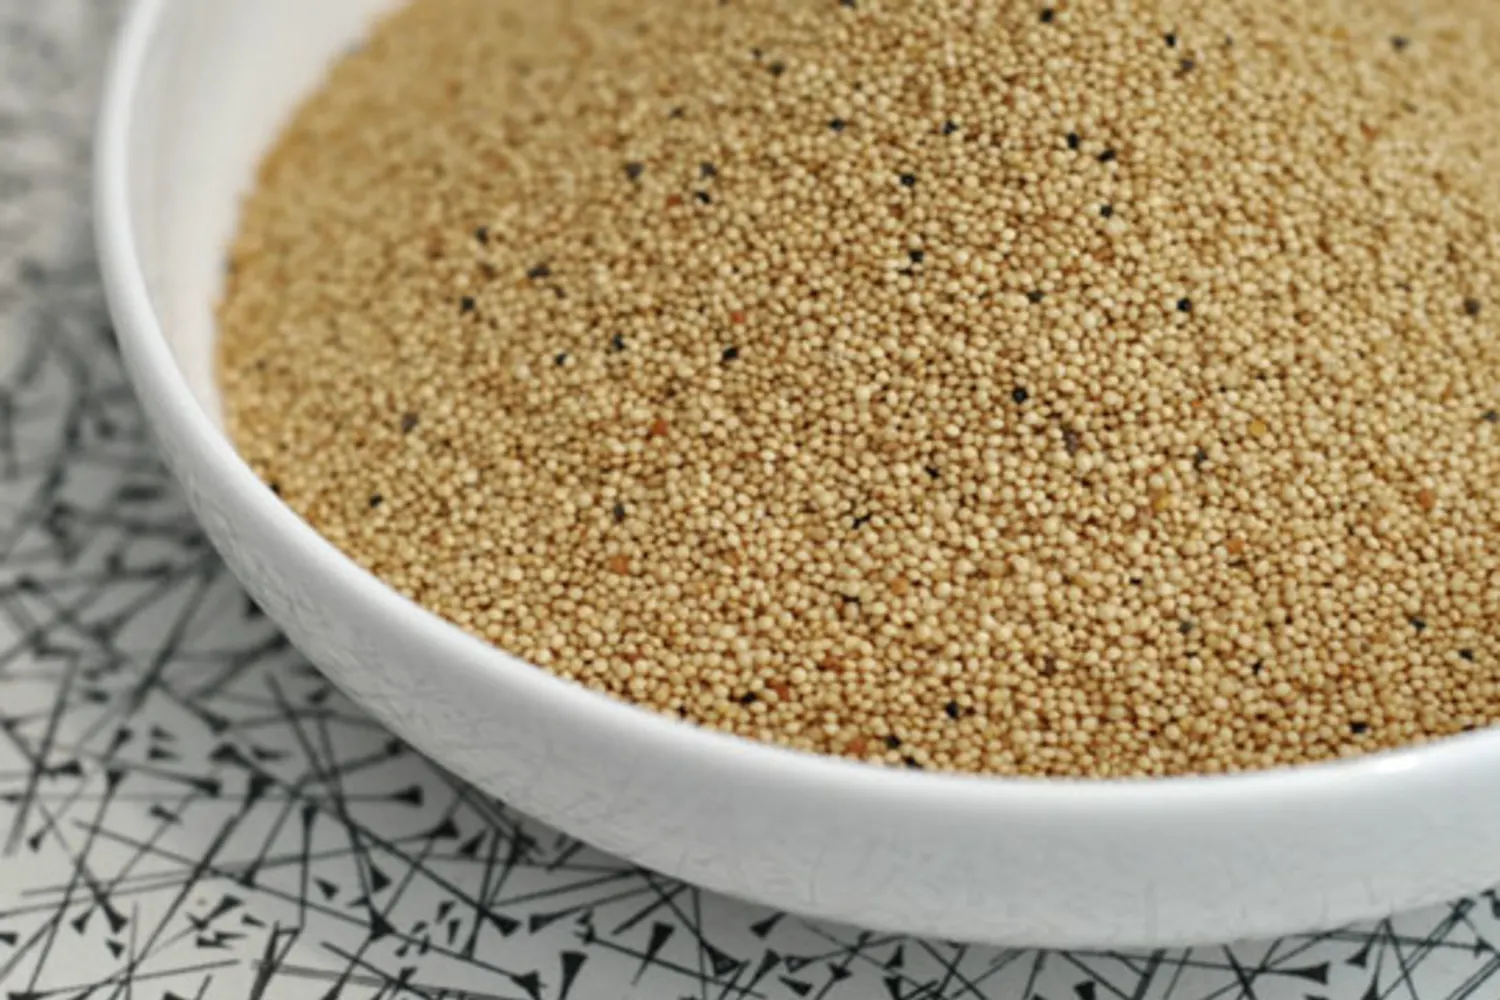 How To Cook Amaranth In A Rice Cooker